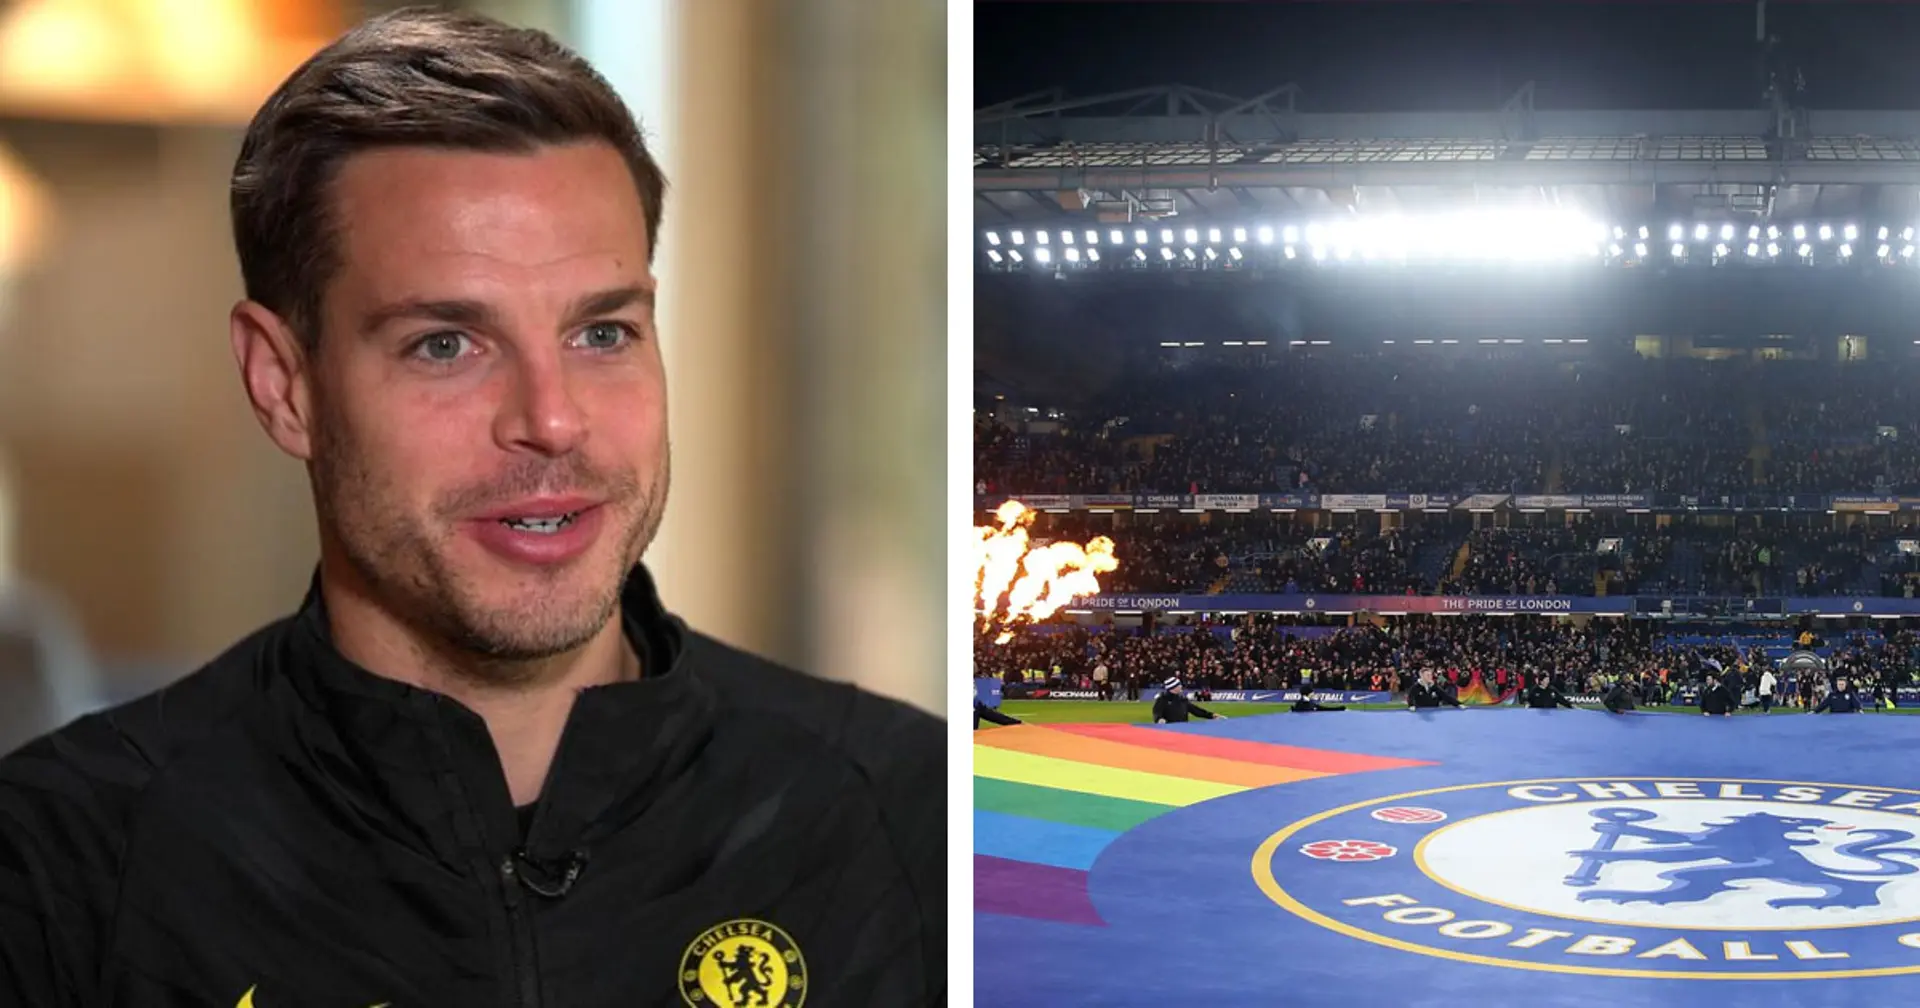 ‘I try to create an environment where everyone feels safe': Azpilicueta explains how he's helping tackle homophobia in football